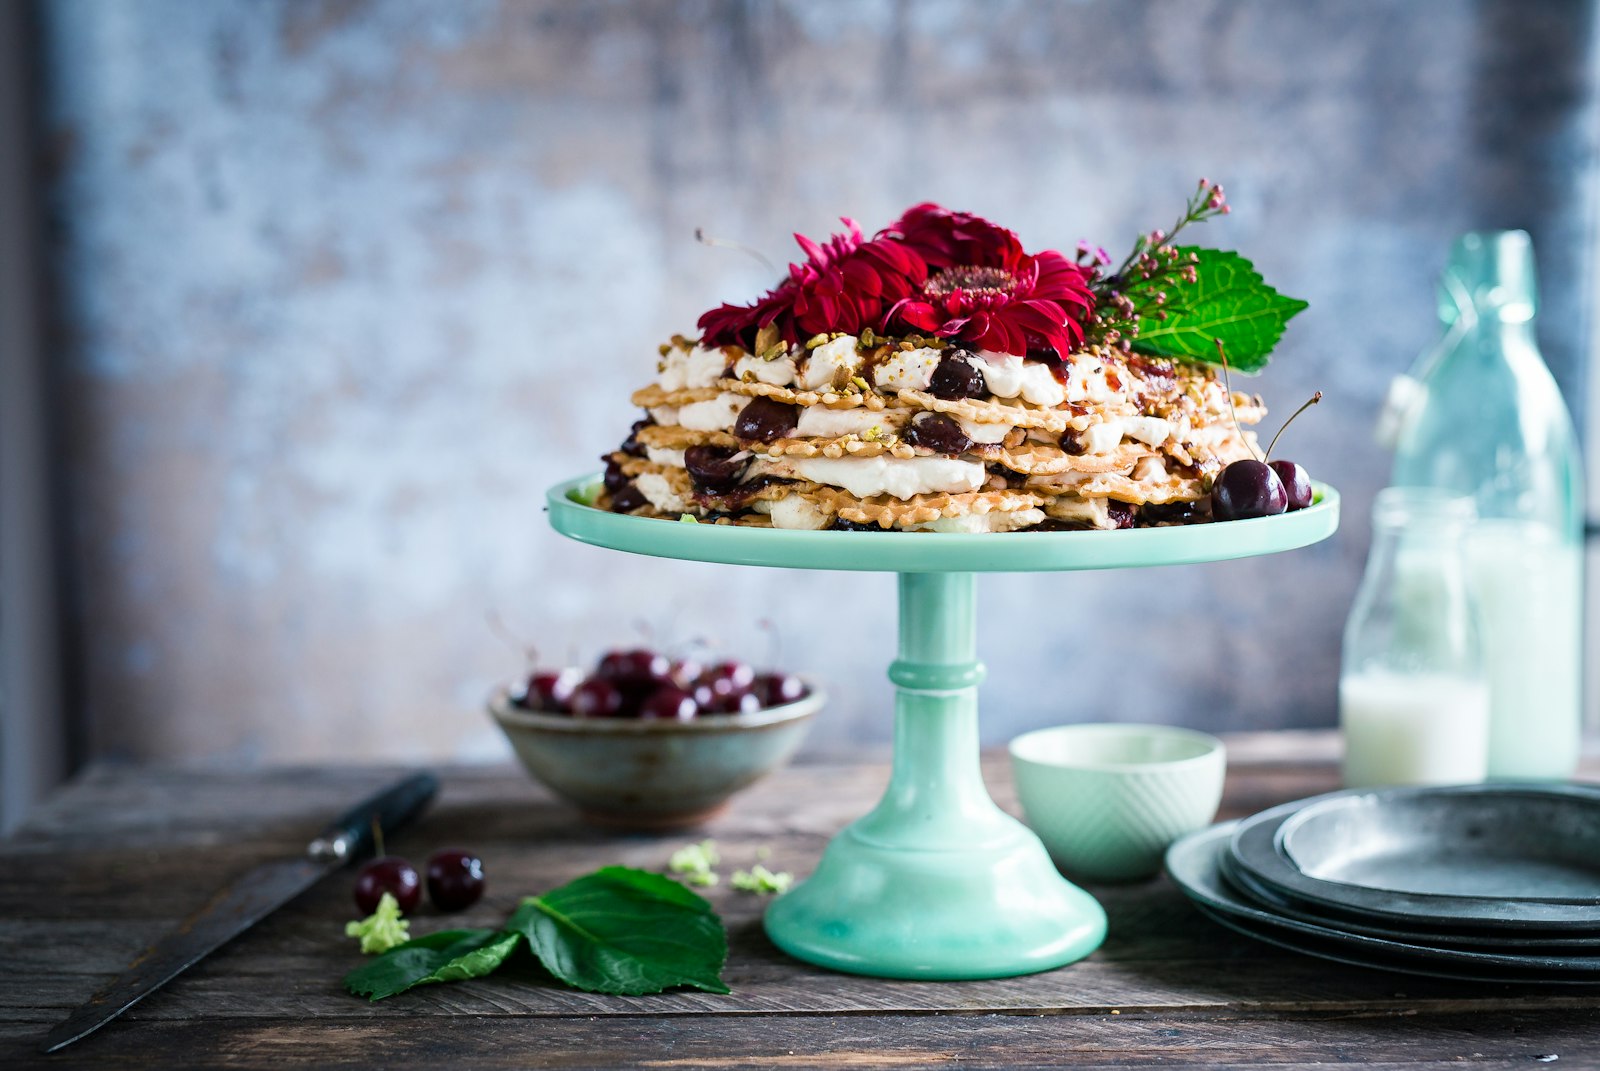 ZEISS Milvus 50mm F1.4 sample photo. Cake on cake stand photography